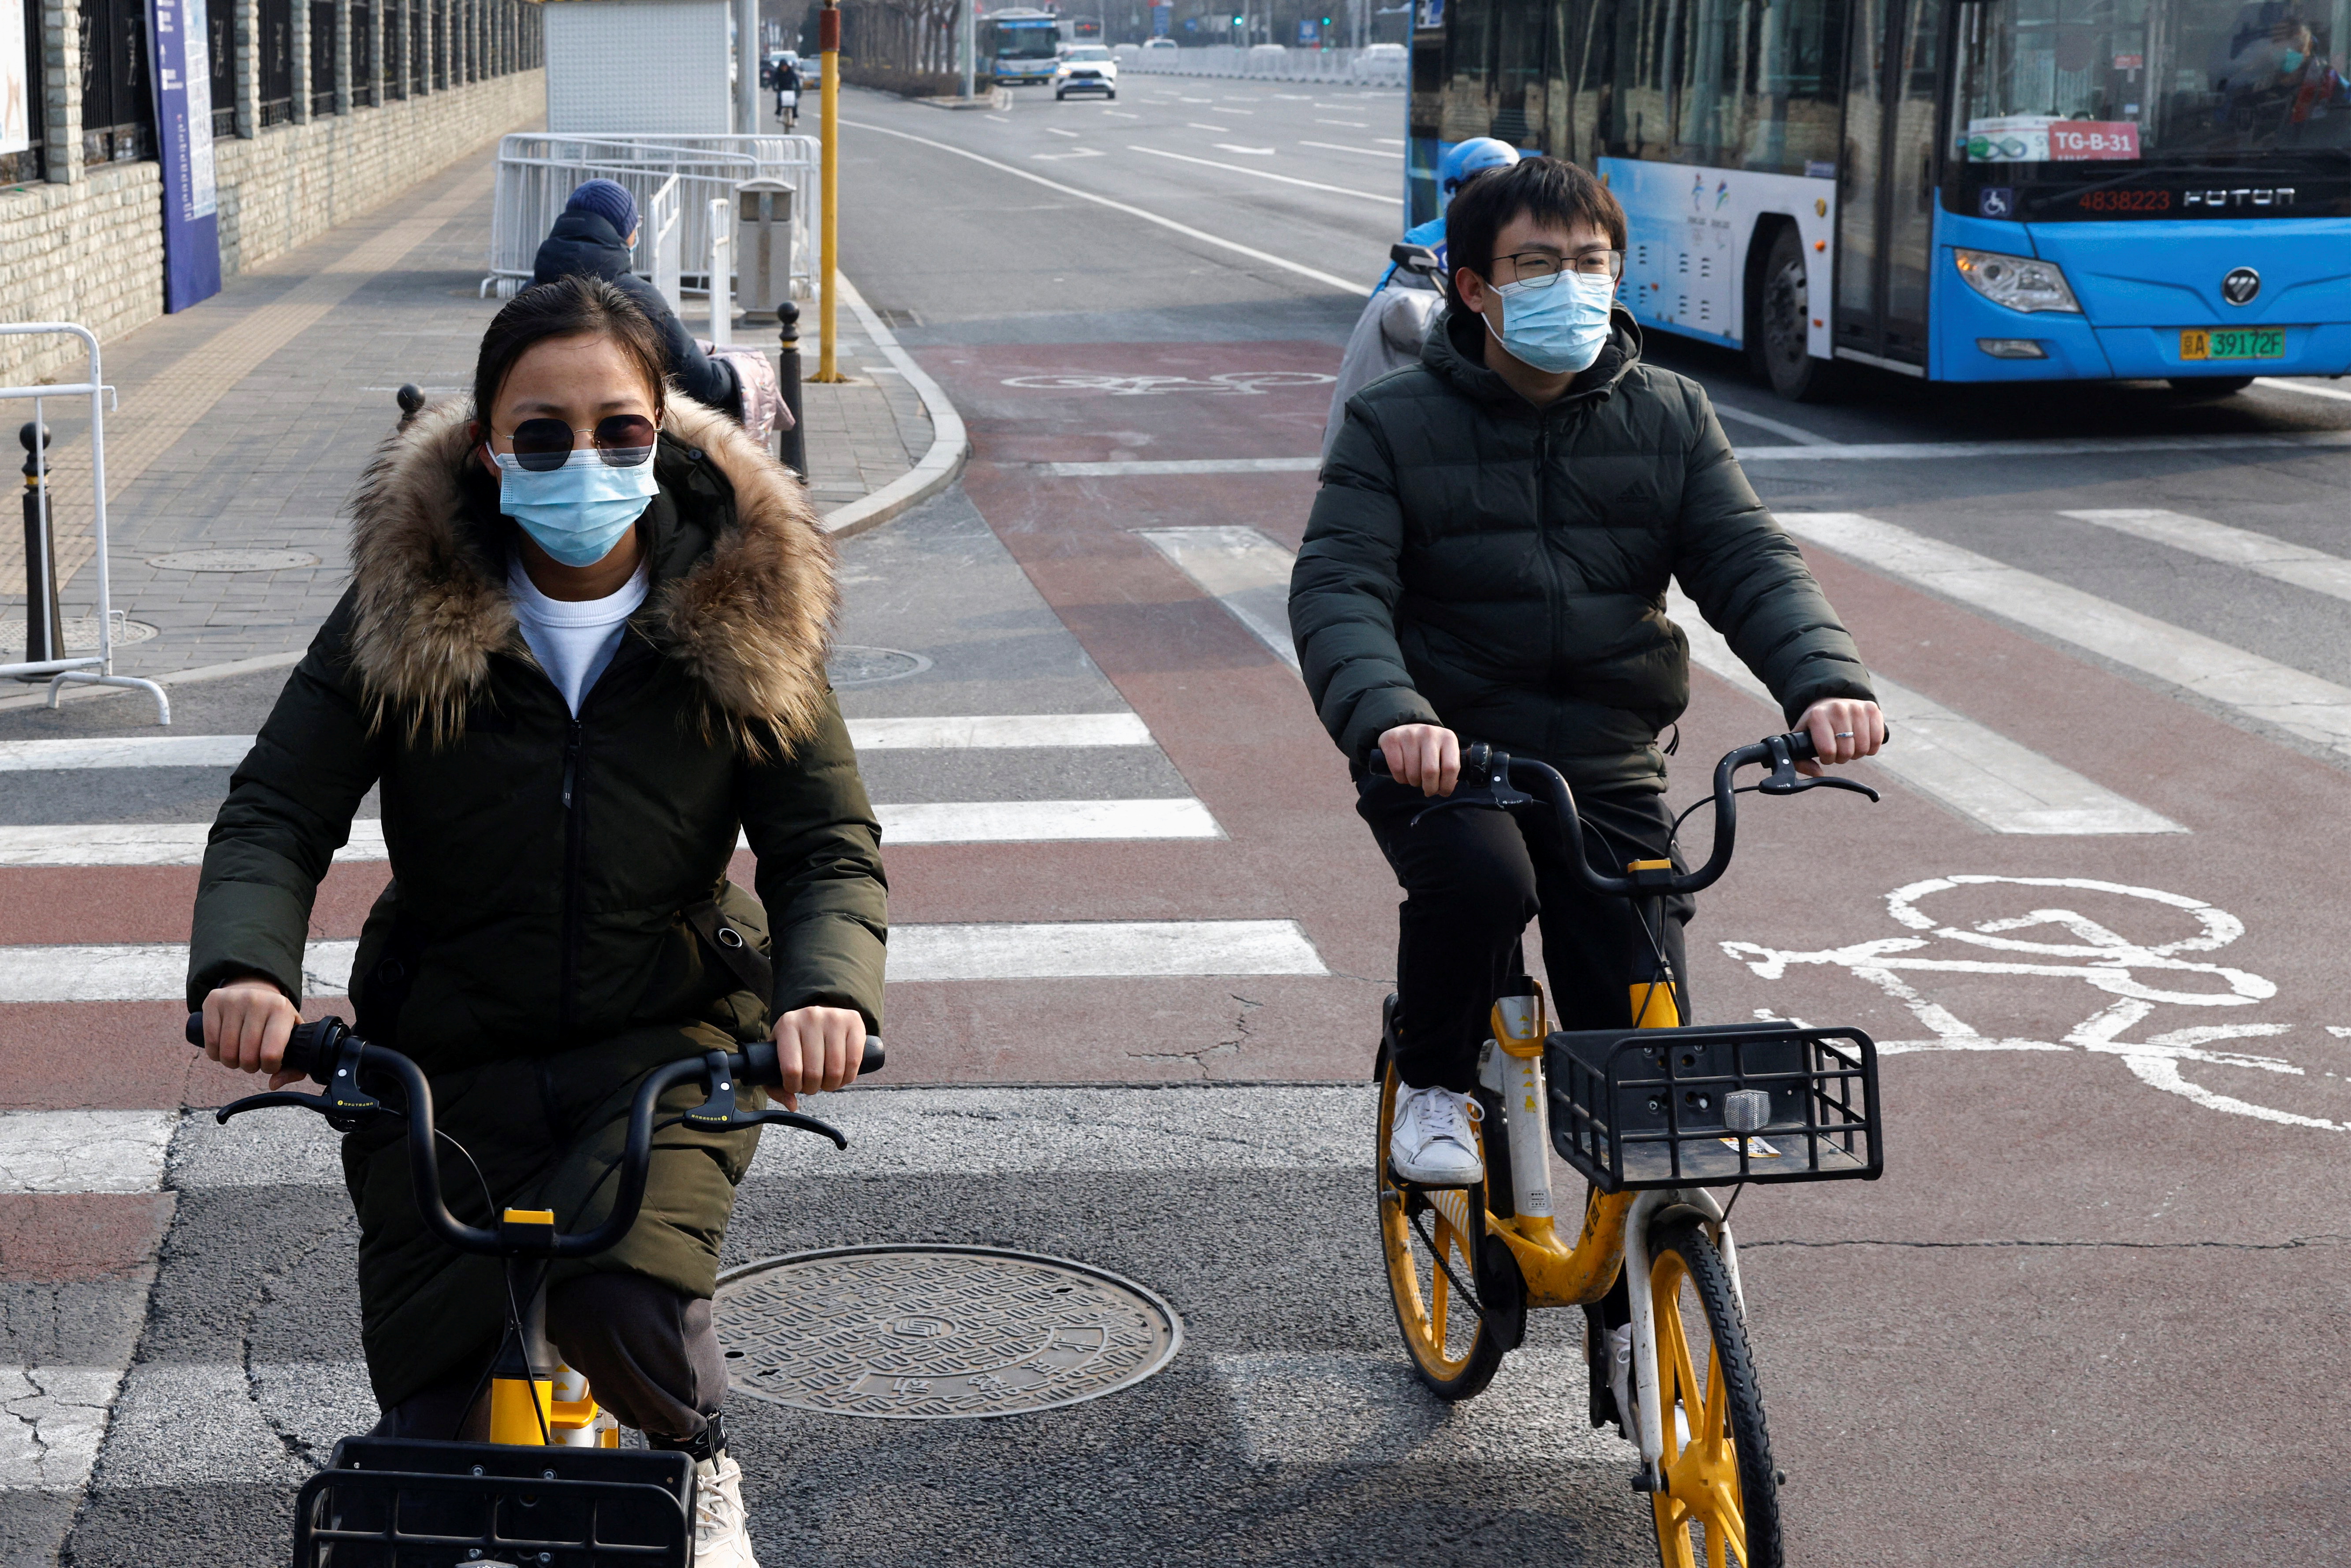 People wearing protective masks ride bicycles in Beijing